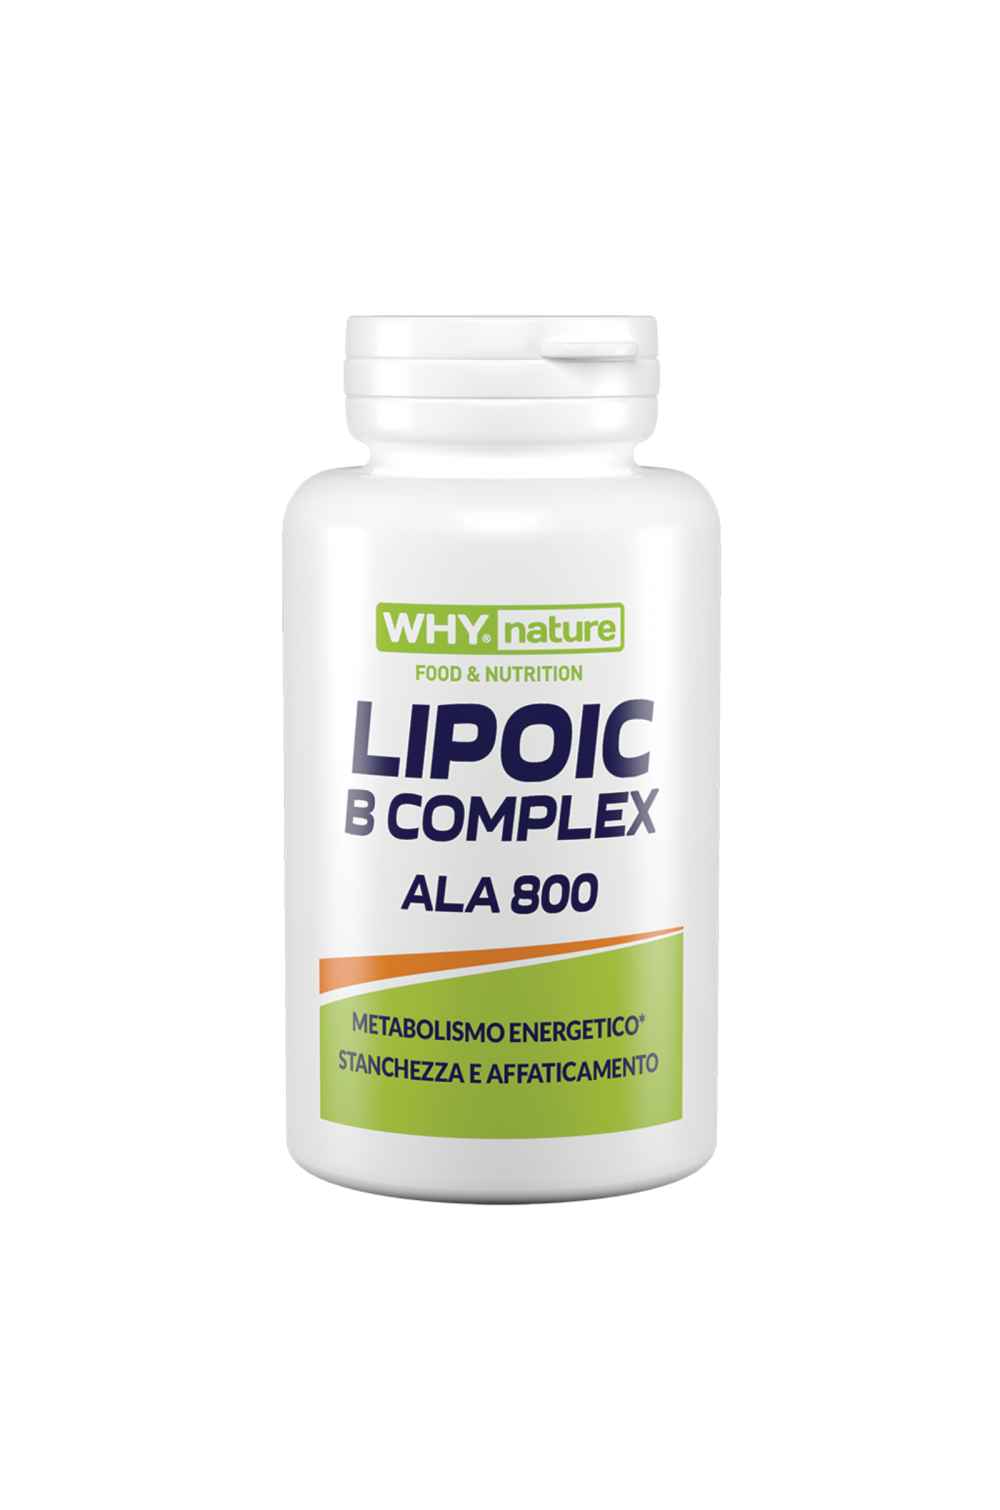 WHY Nature Lipoic B Complex Ala 800 90 cpr